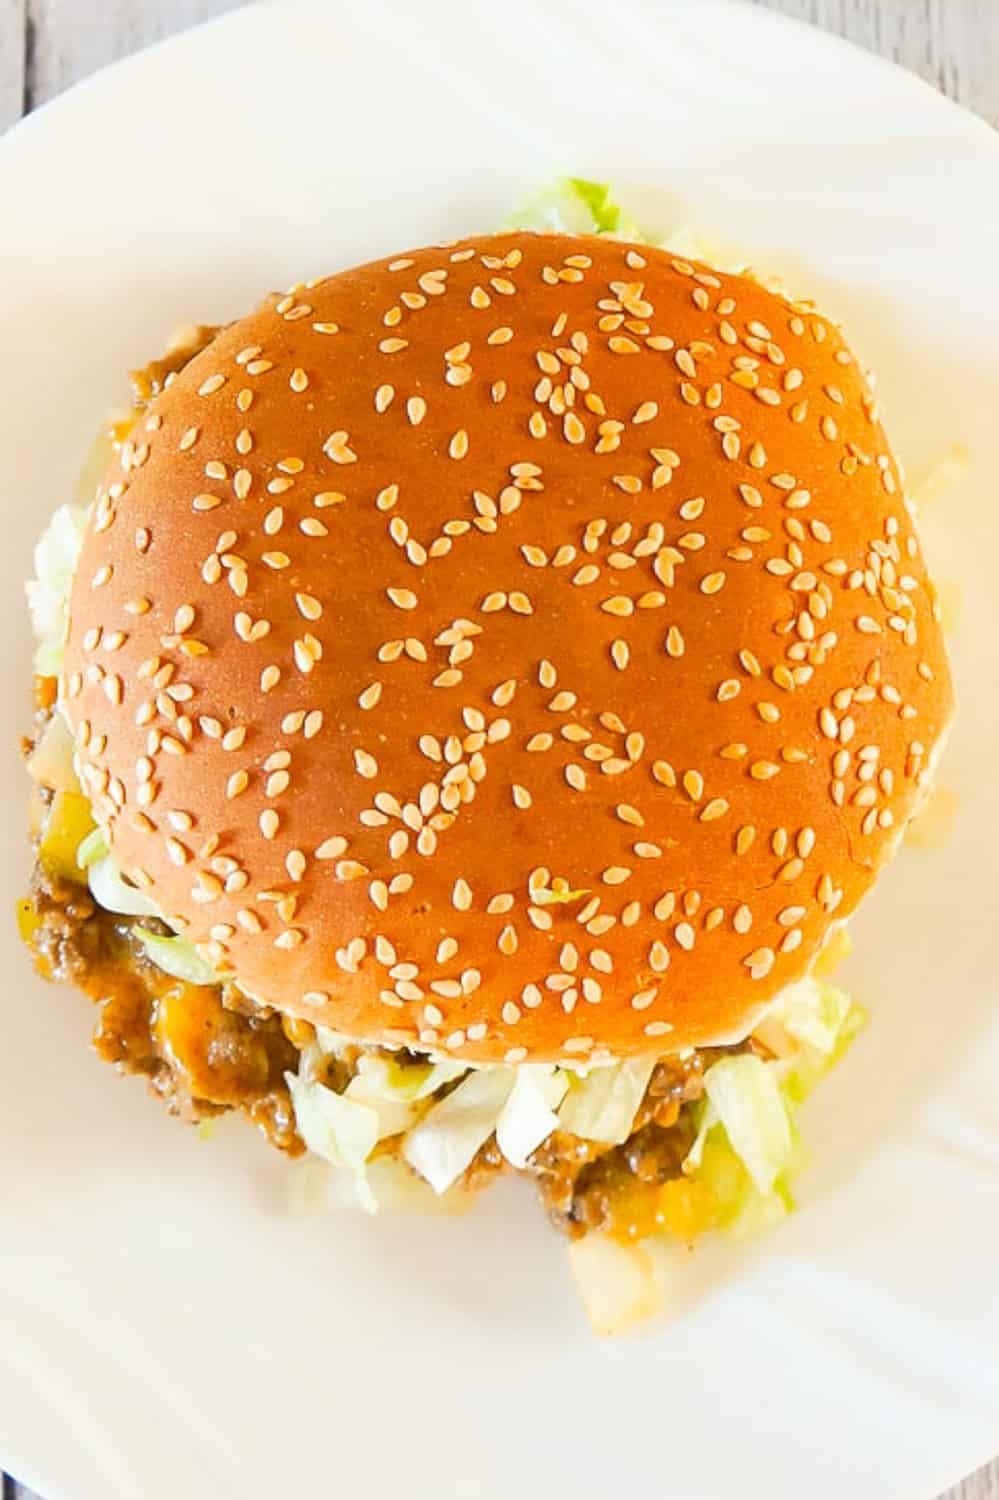 Big Mac Sloppy Joes are an easy ground beef dinner recipe perfect for weeknights. These sloppy joes are loaded with onions, pickles and cheddar cheese all tossed in a copycat Big Mac Sauce.